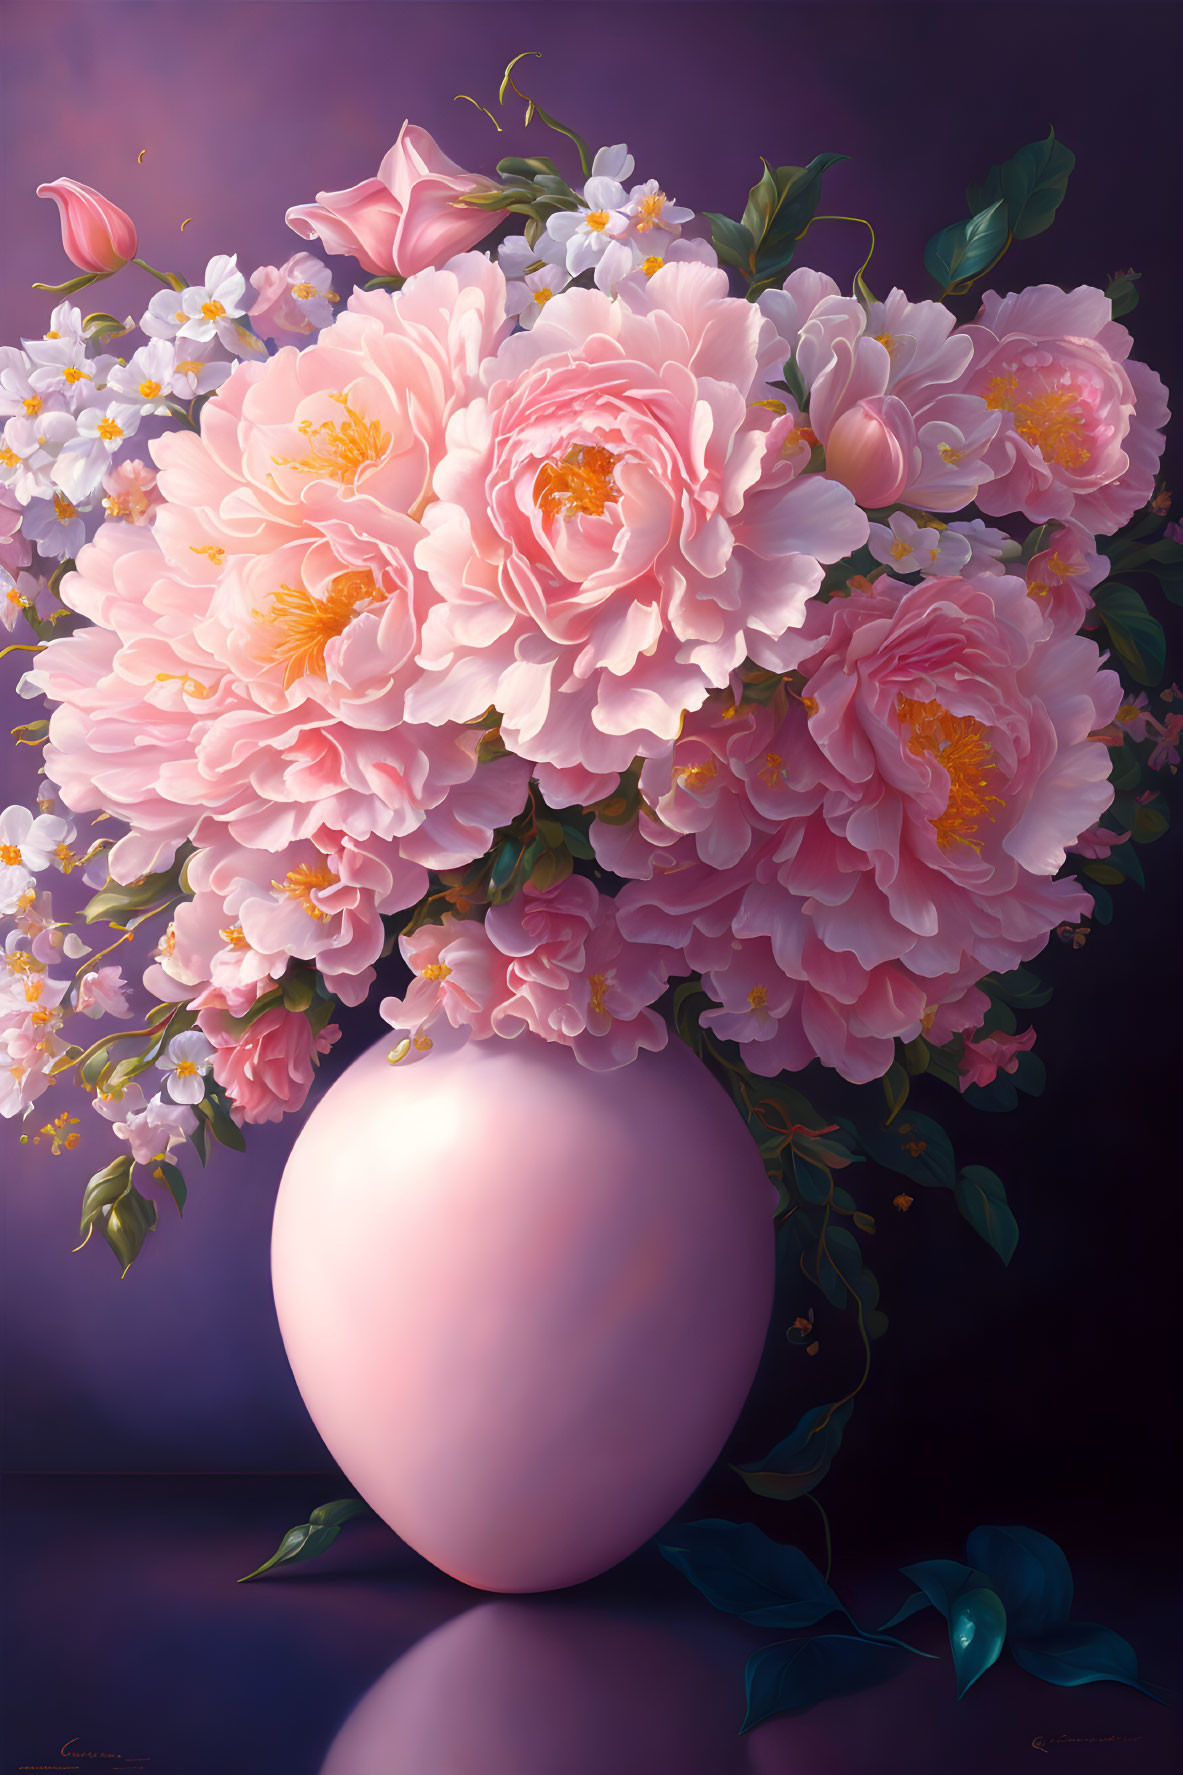 Colorful painting of pink peonies and white flowers in pink vase on purple background